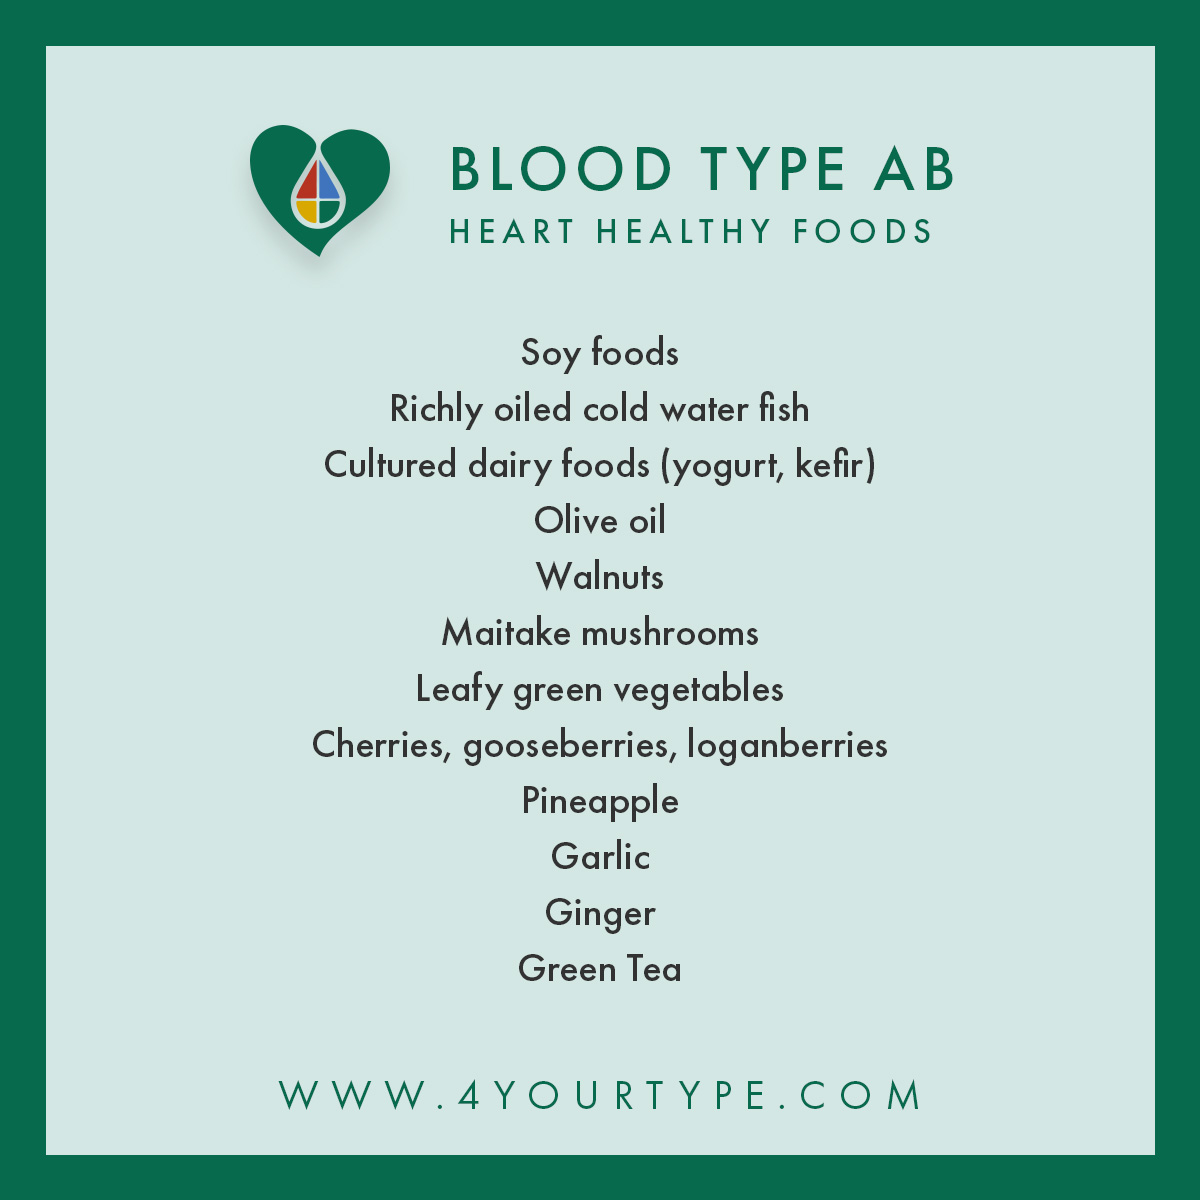 Heart healthy foods blood type AB